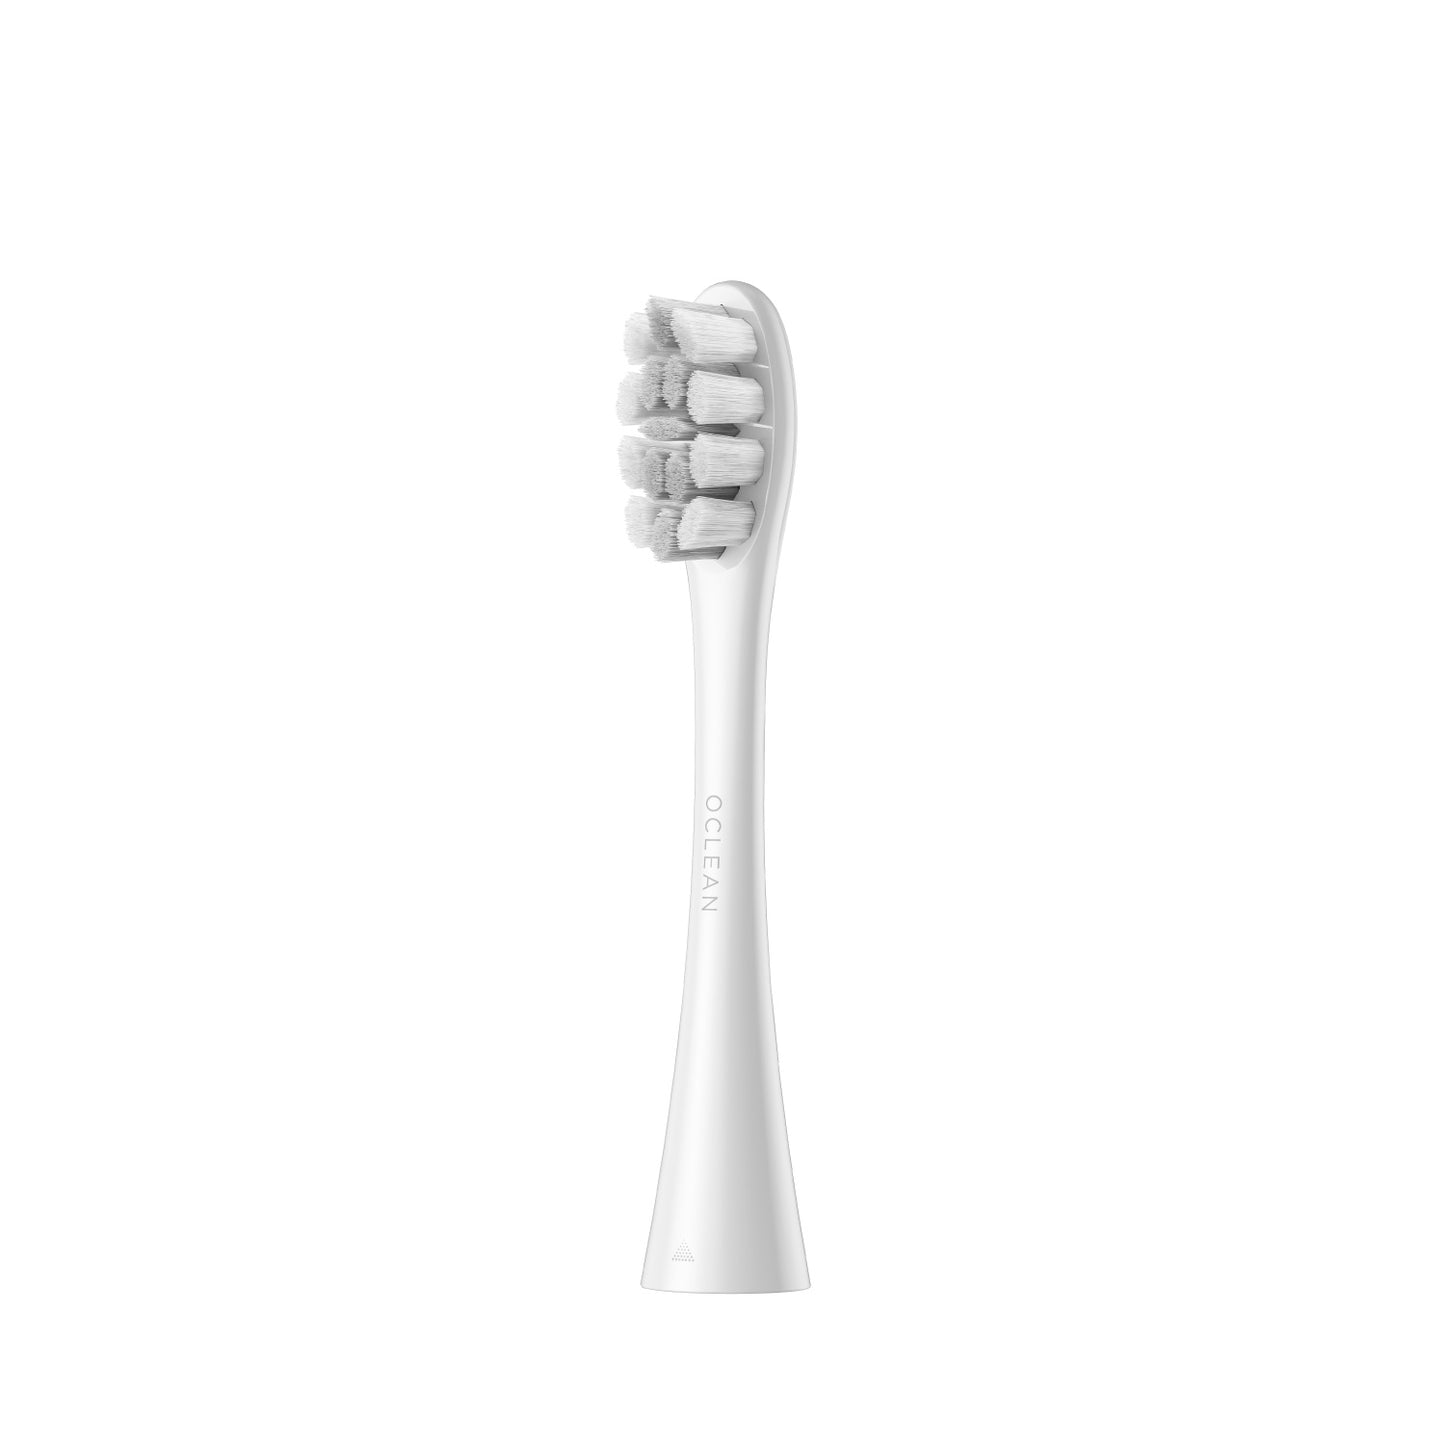 Oclean Brush Heads Refills Toothbrush Replacement Heads Plaque Control P1C10 Oclean US Store